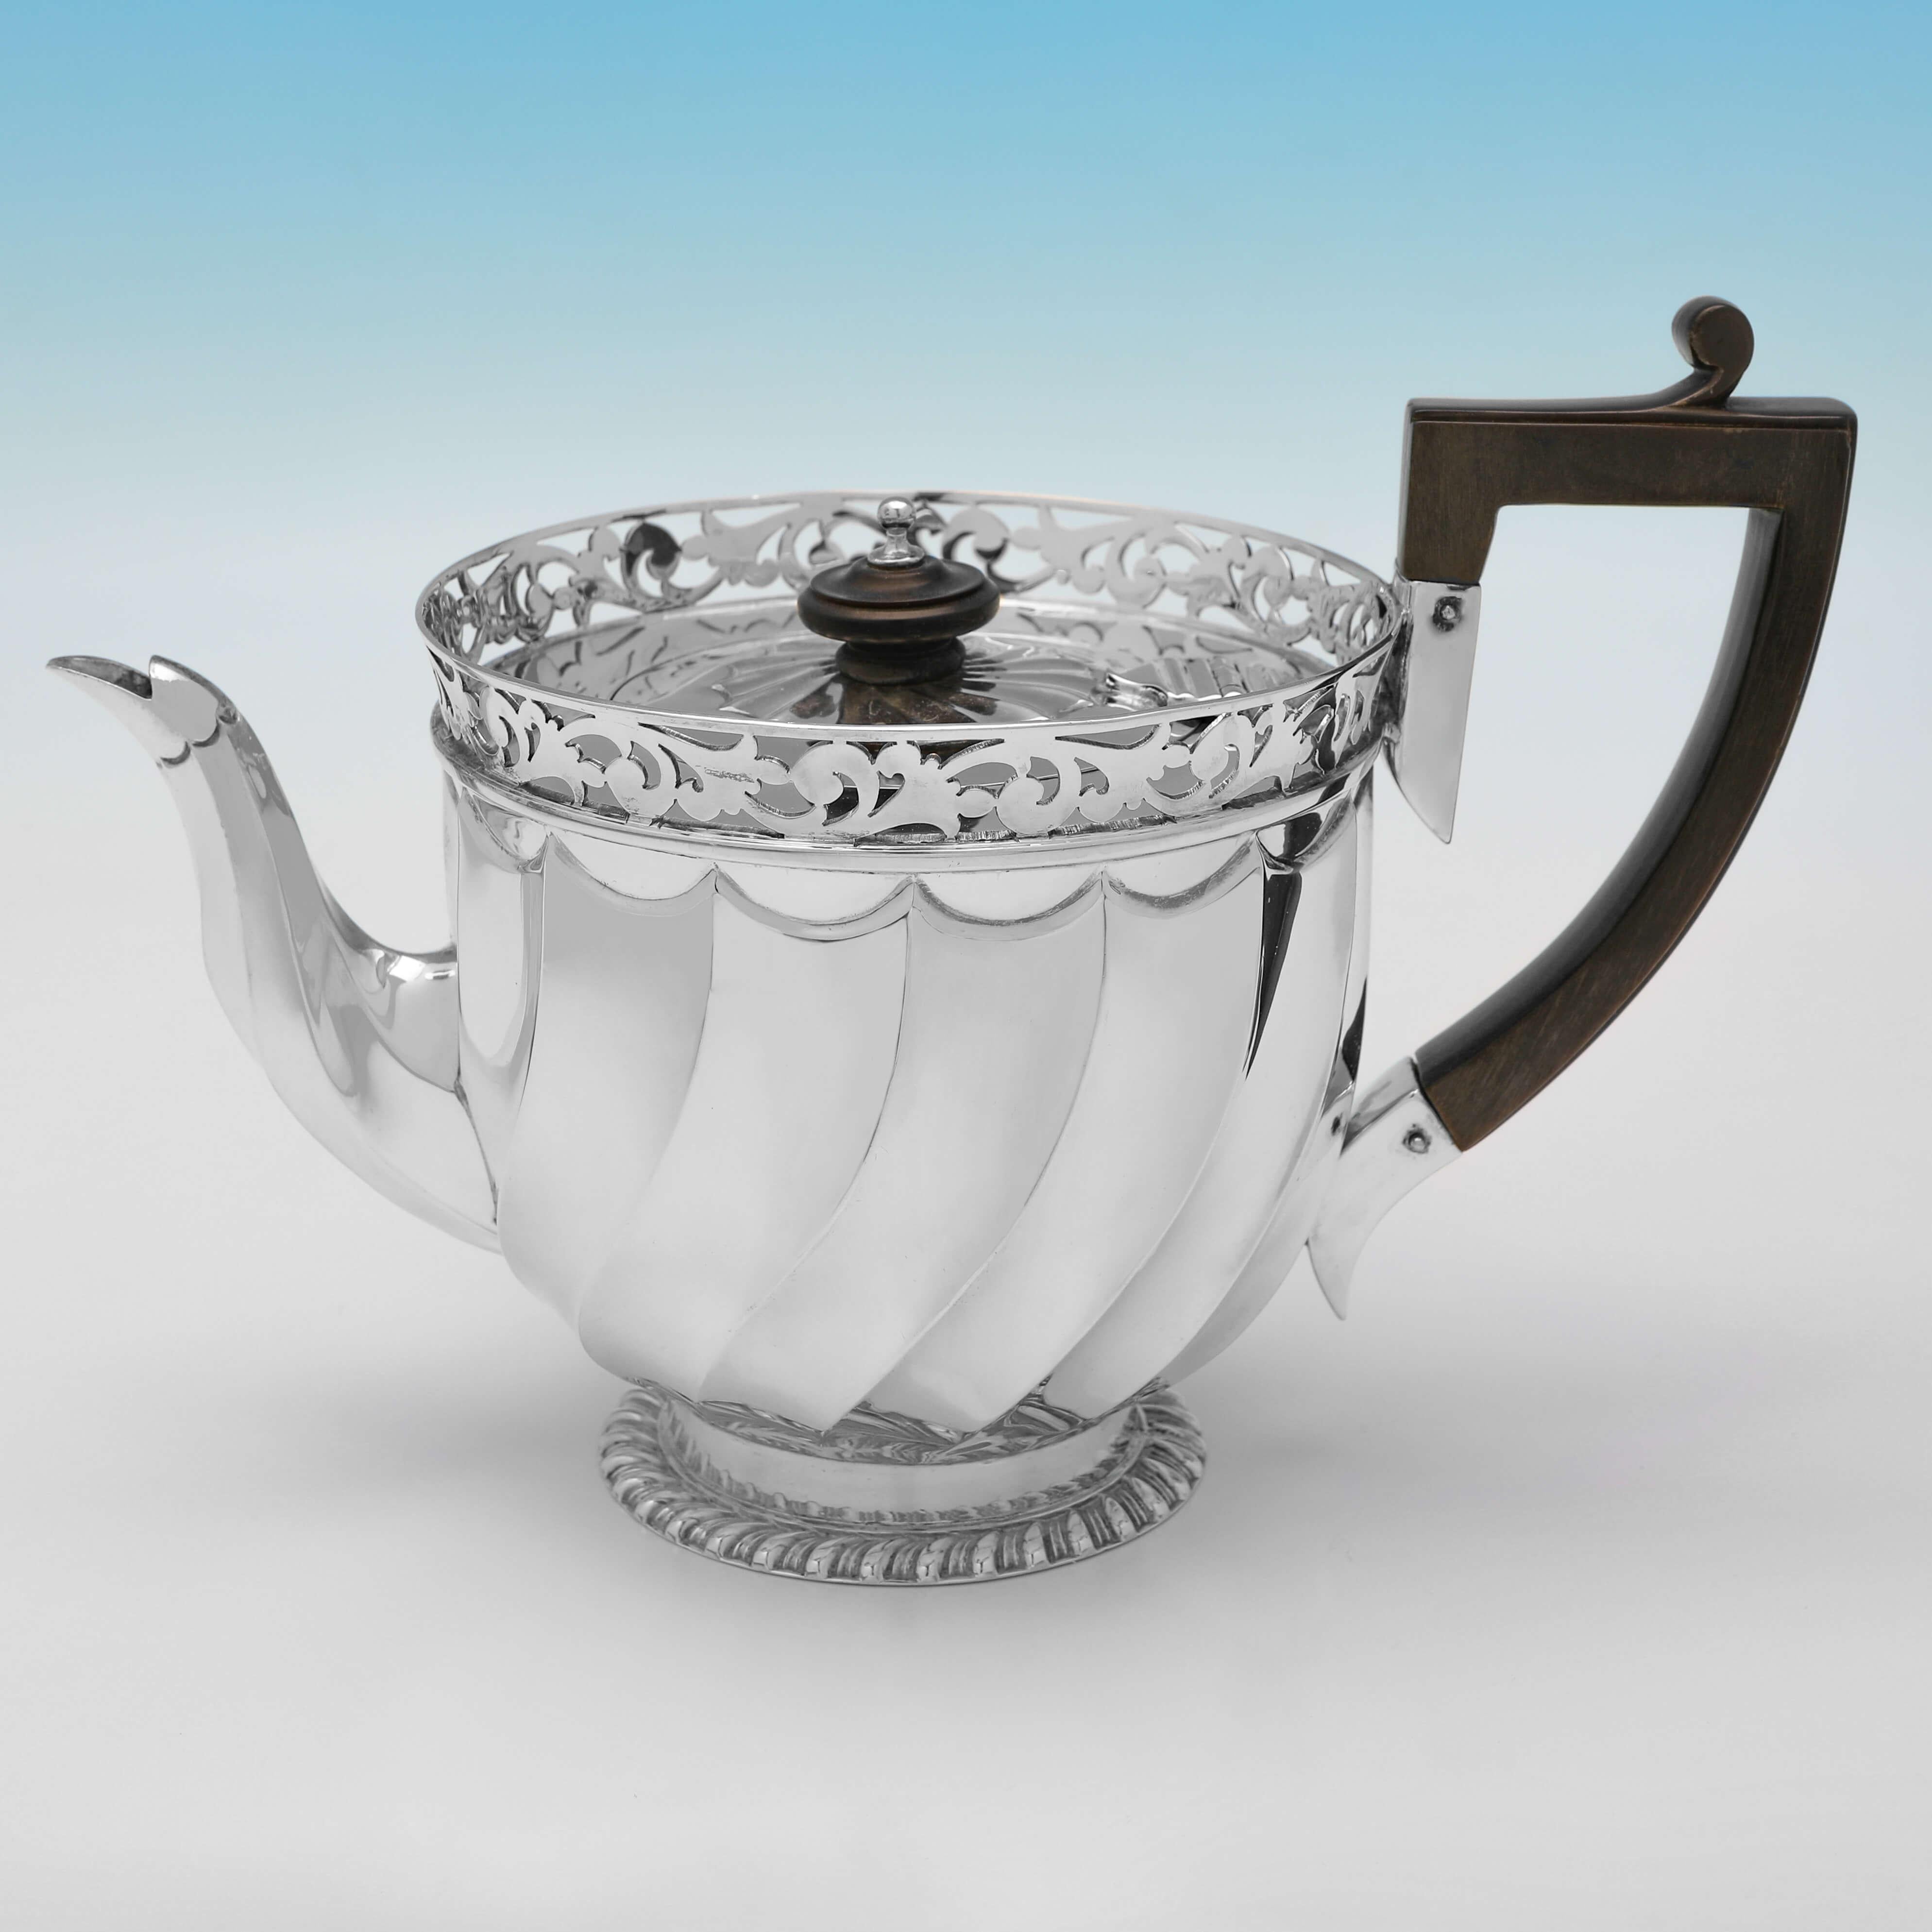 Hallmarked in London in 1902 by Wakely & Wheeler, this charming, Antique Sterling Silver Tea Set, is presented in its original box, and comprises a teapot, cream jug and sugar bowl, all with swirled panelling and pierced borders. 

The teapot